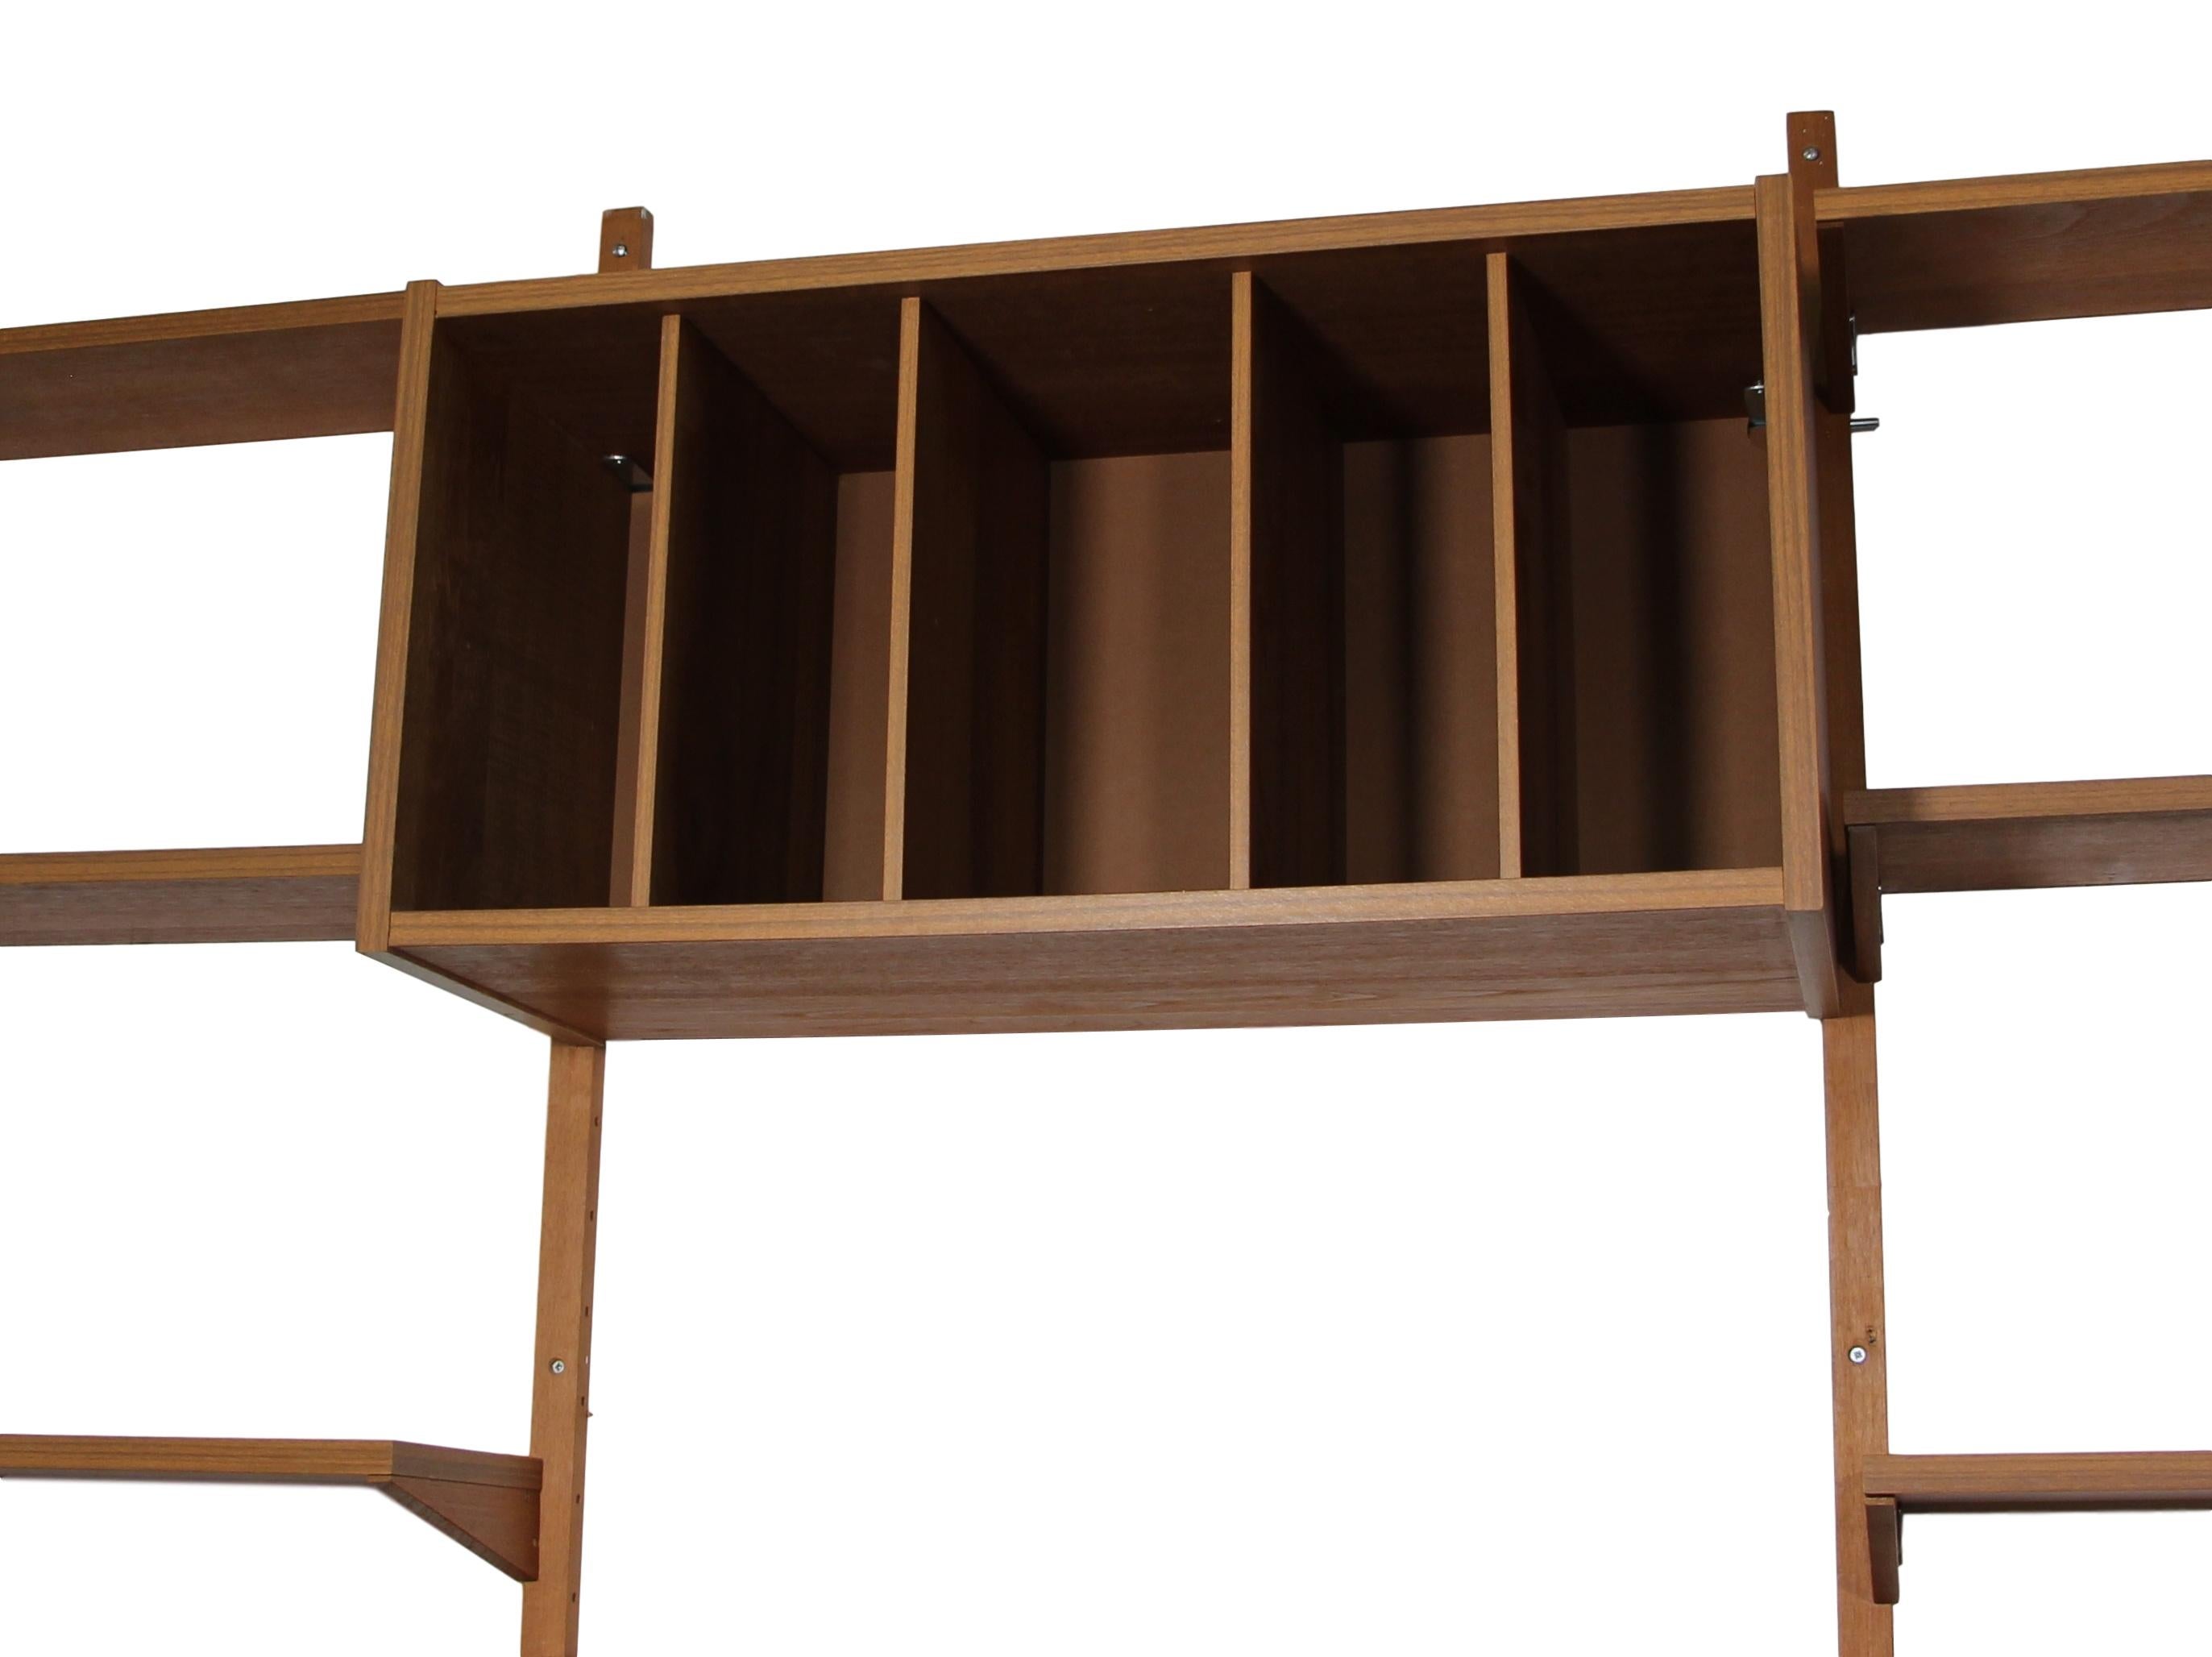 20th Century Midcentury Danish 7 Bay Teak Shelving Unit By PS Systems